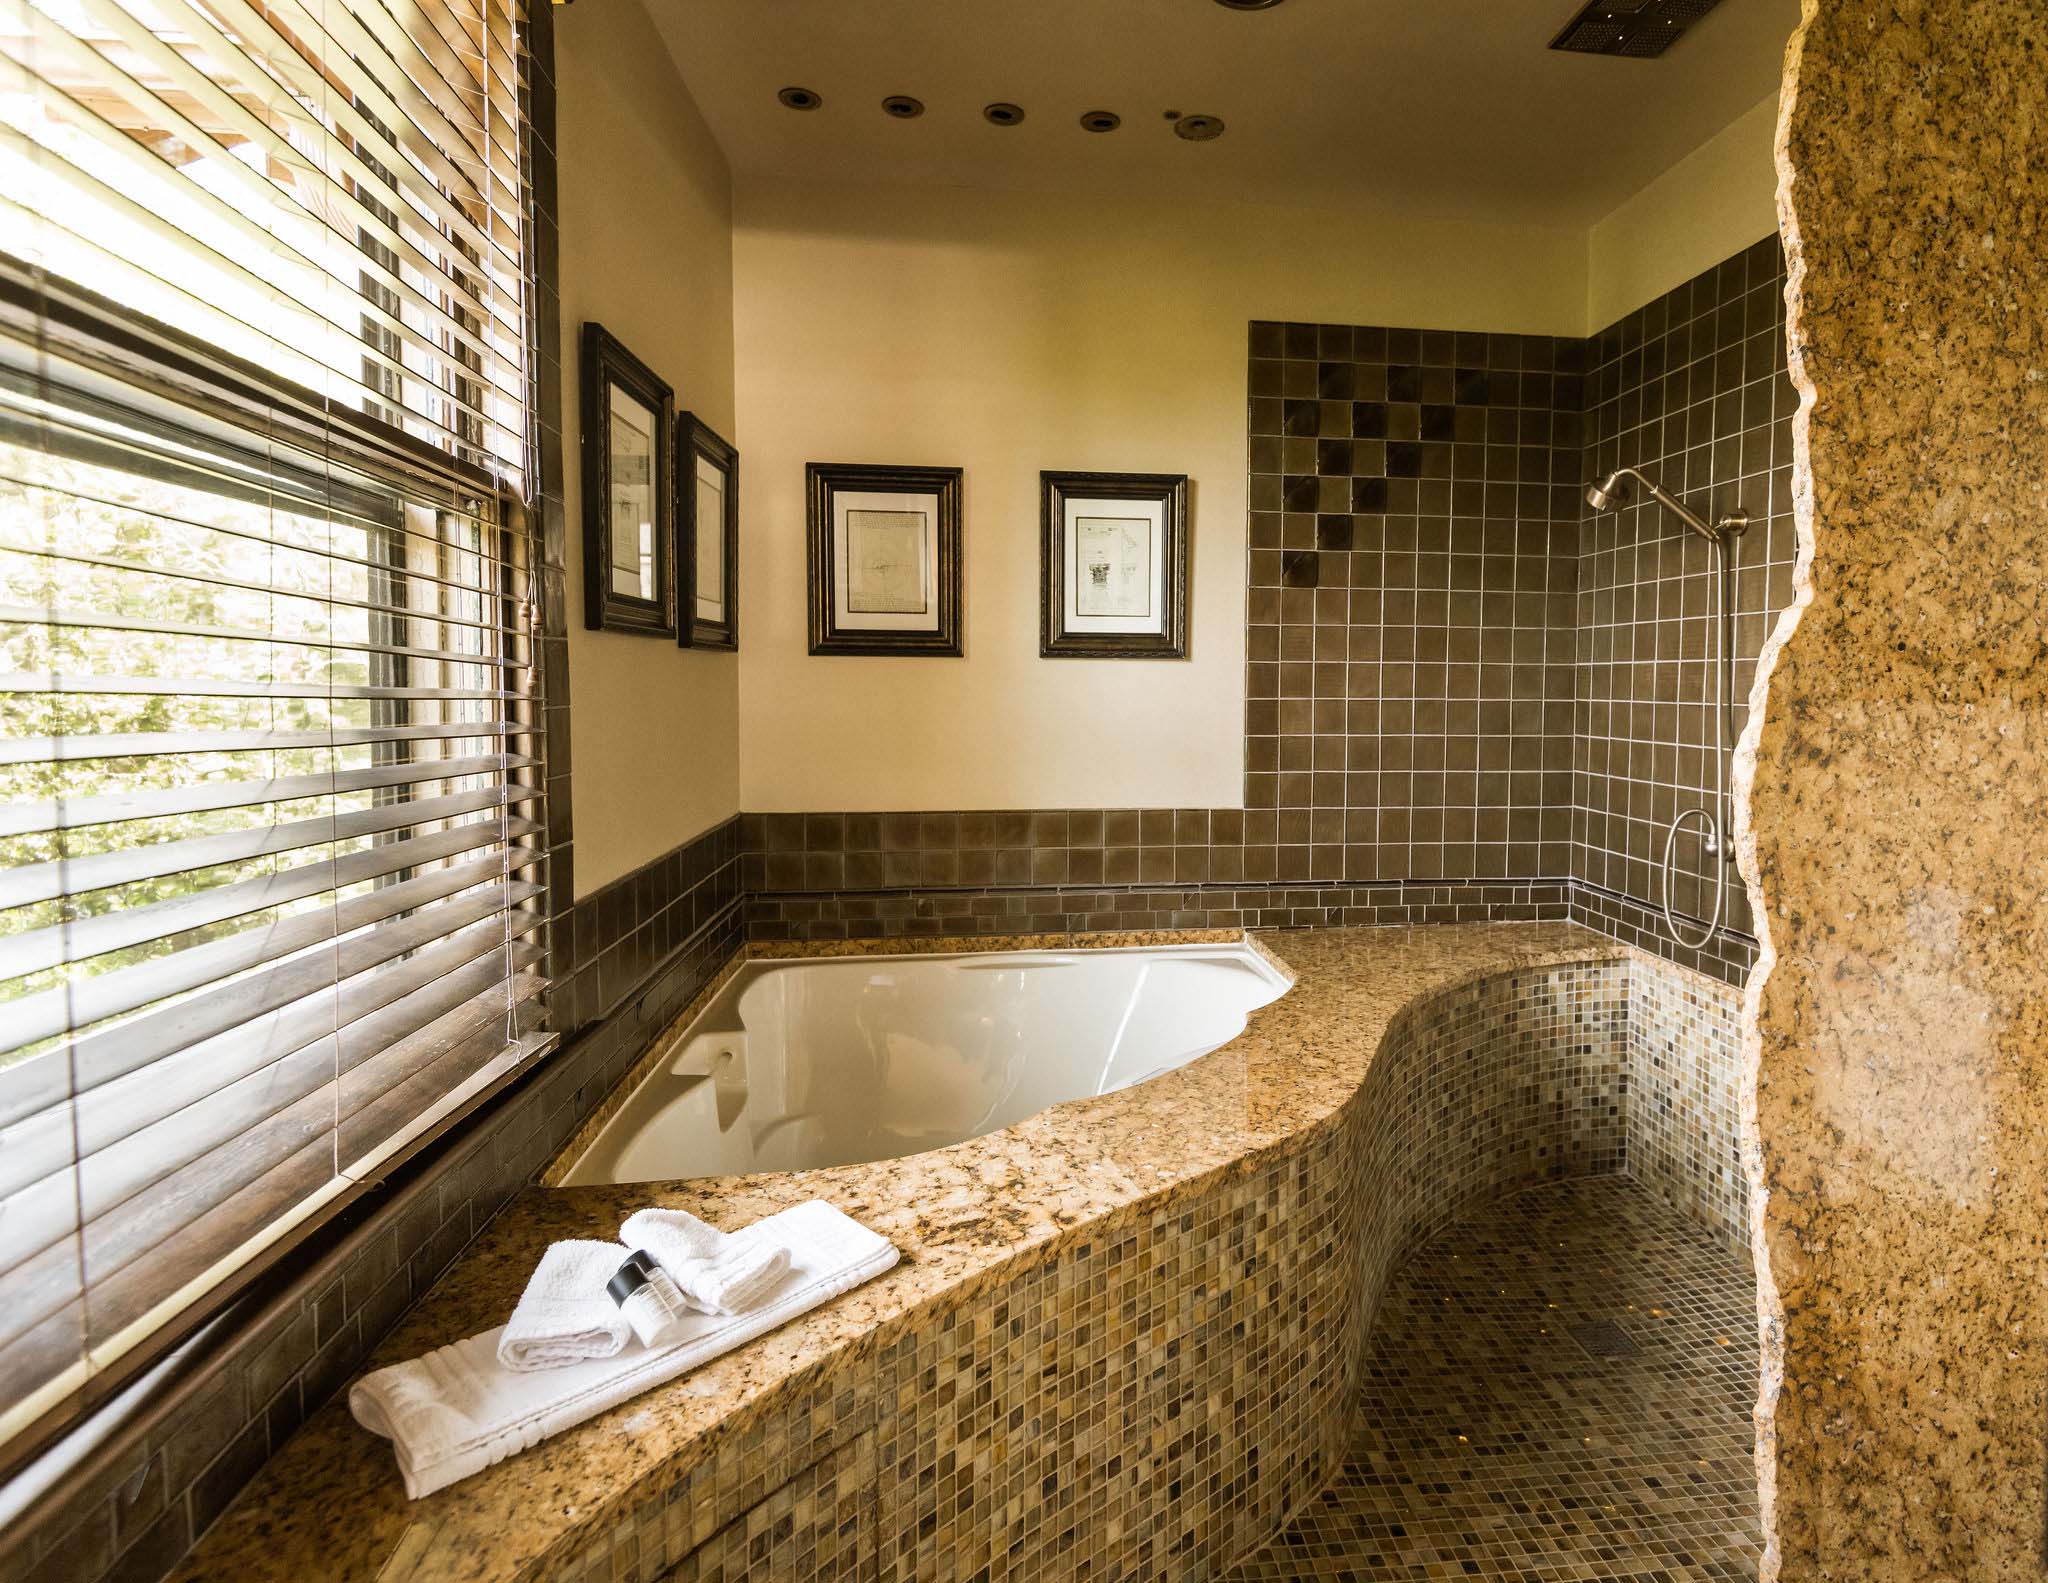 Our Asheville B&B Bathrooms Featured on “10 Gorgeous Hotel Bathrooms Around the World”!